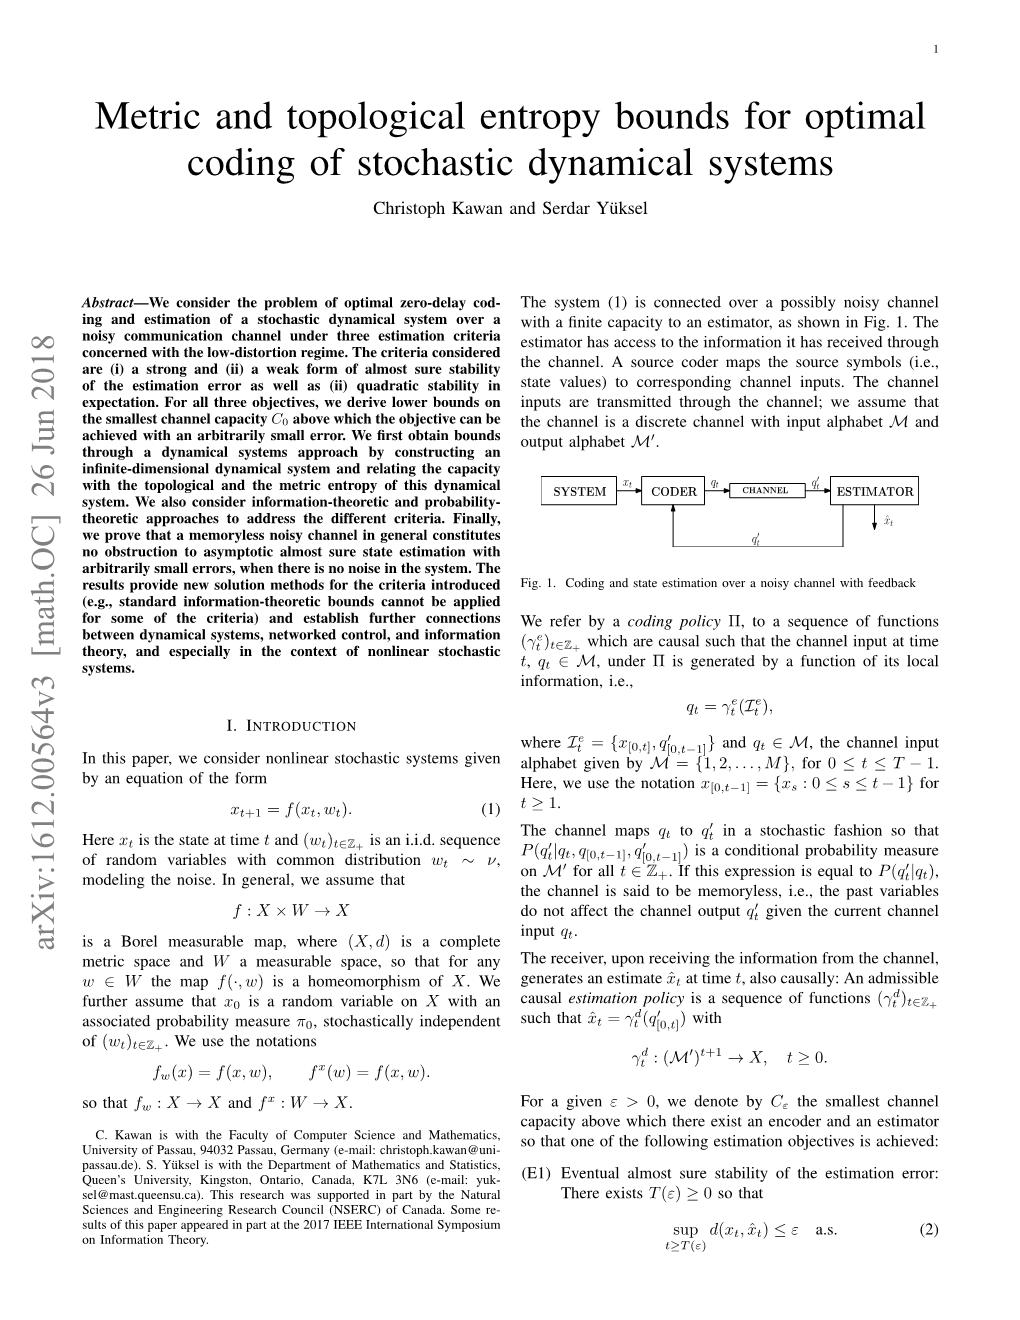 Metric and Topological Entropy Bounds for Optimal Coding of Stochastic Dynamical Systems Christoph Kawan and Serdar Yuksel¨